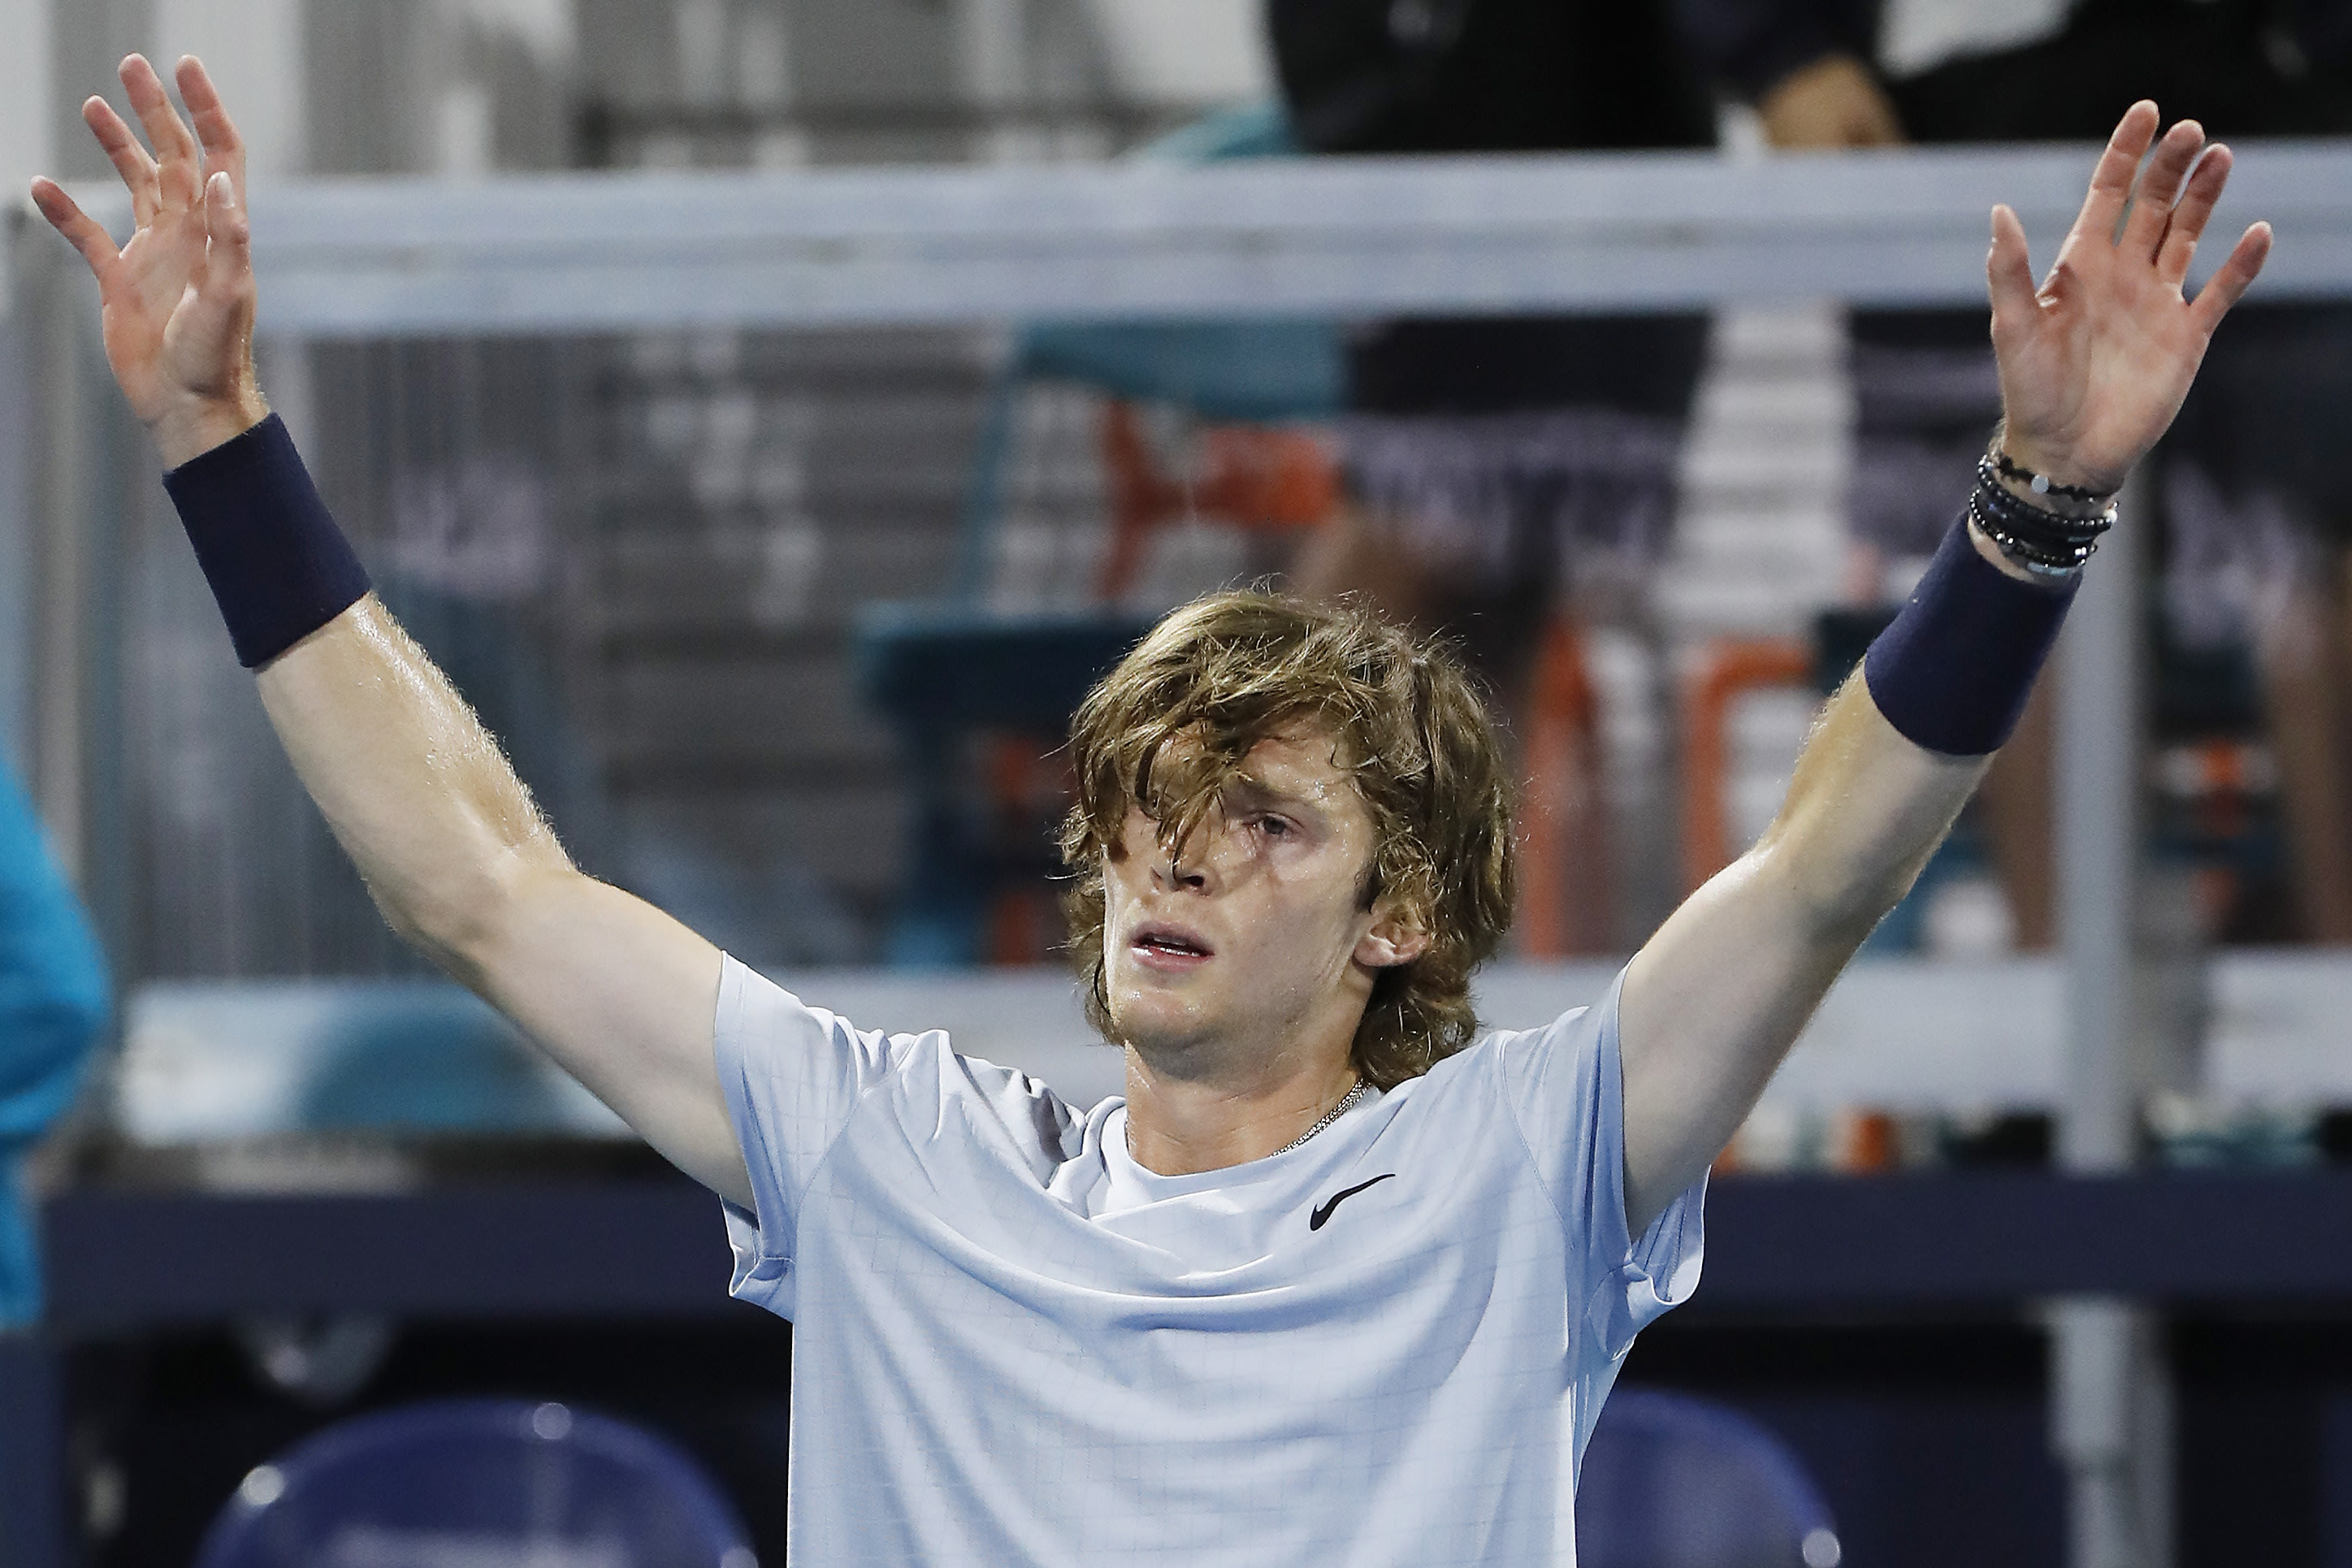 Miami Open reaction: Korda may be the future—but Rublev is the present